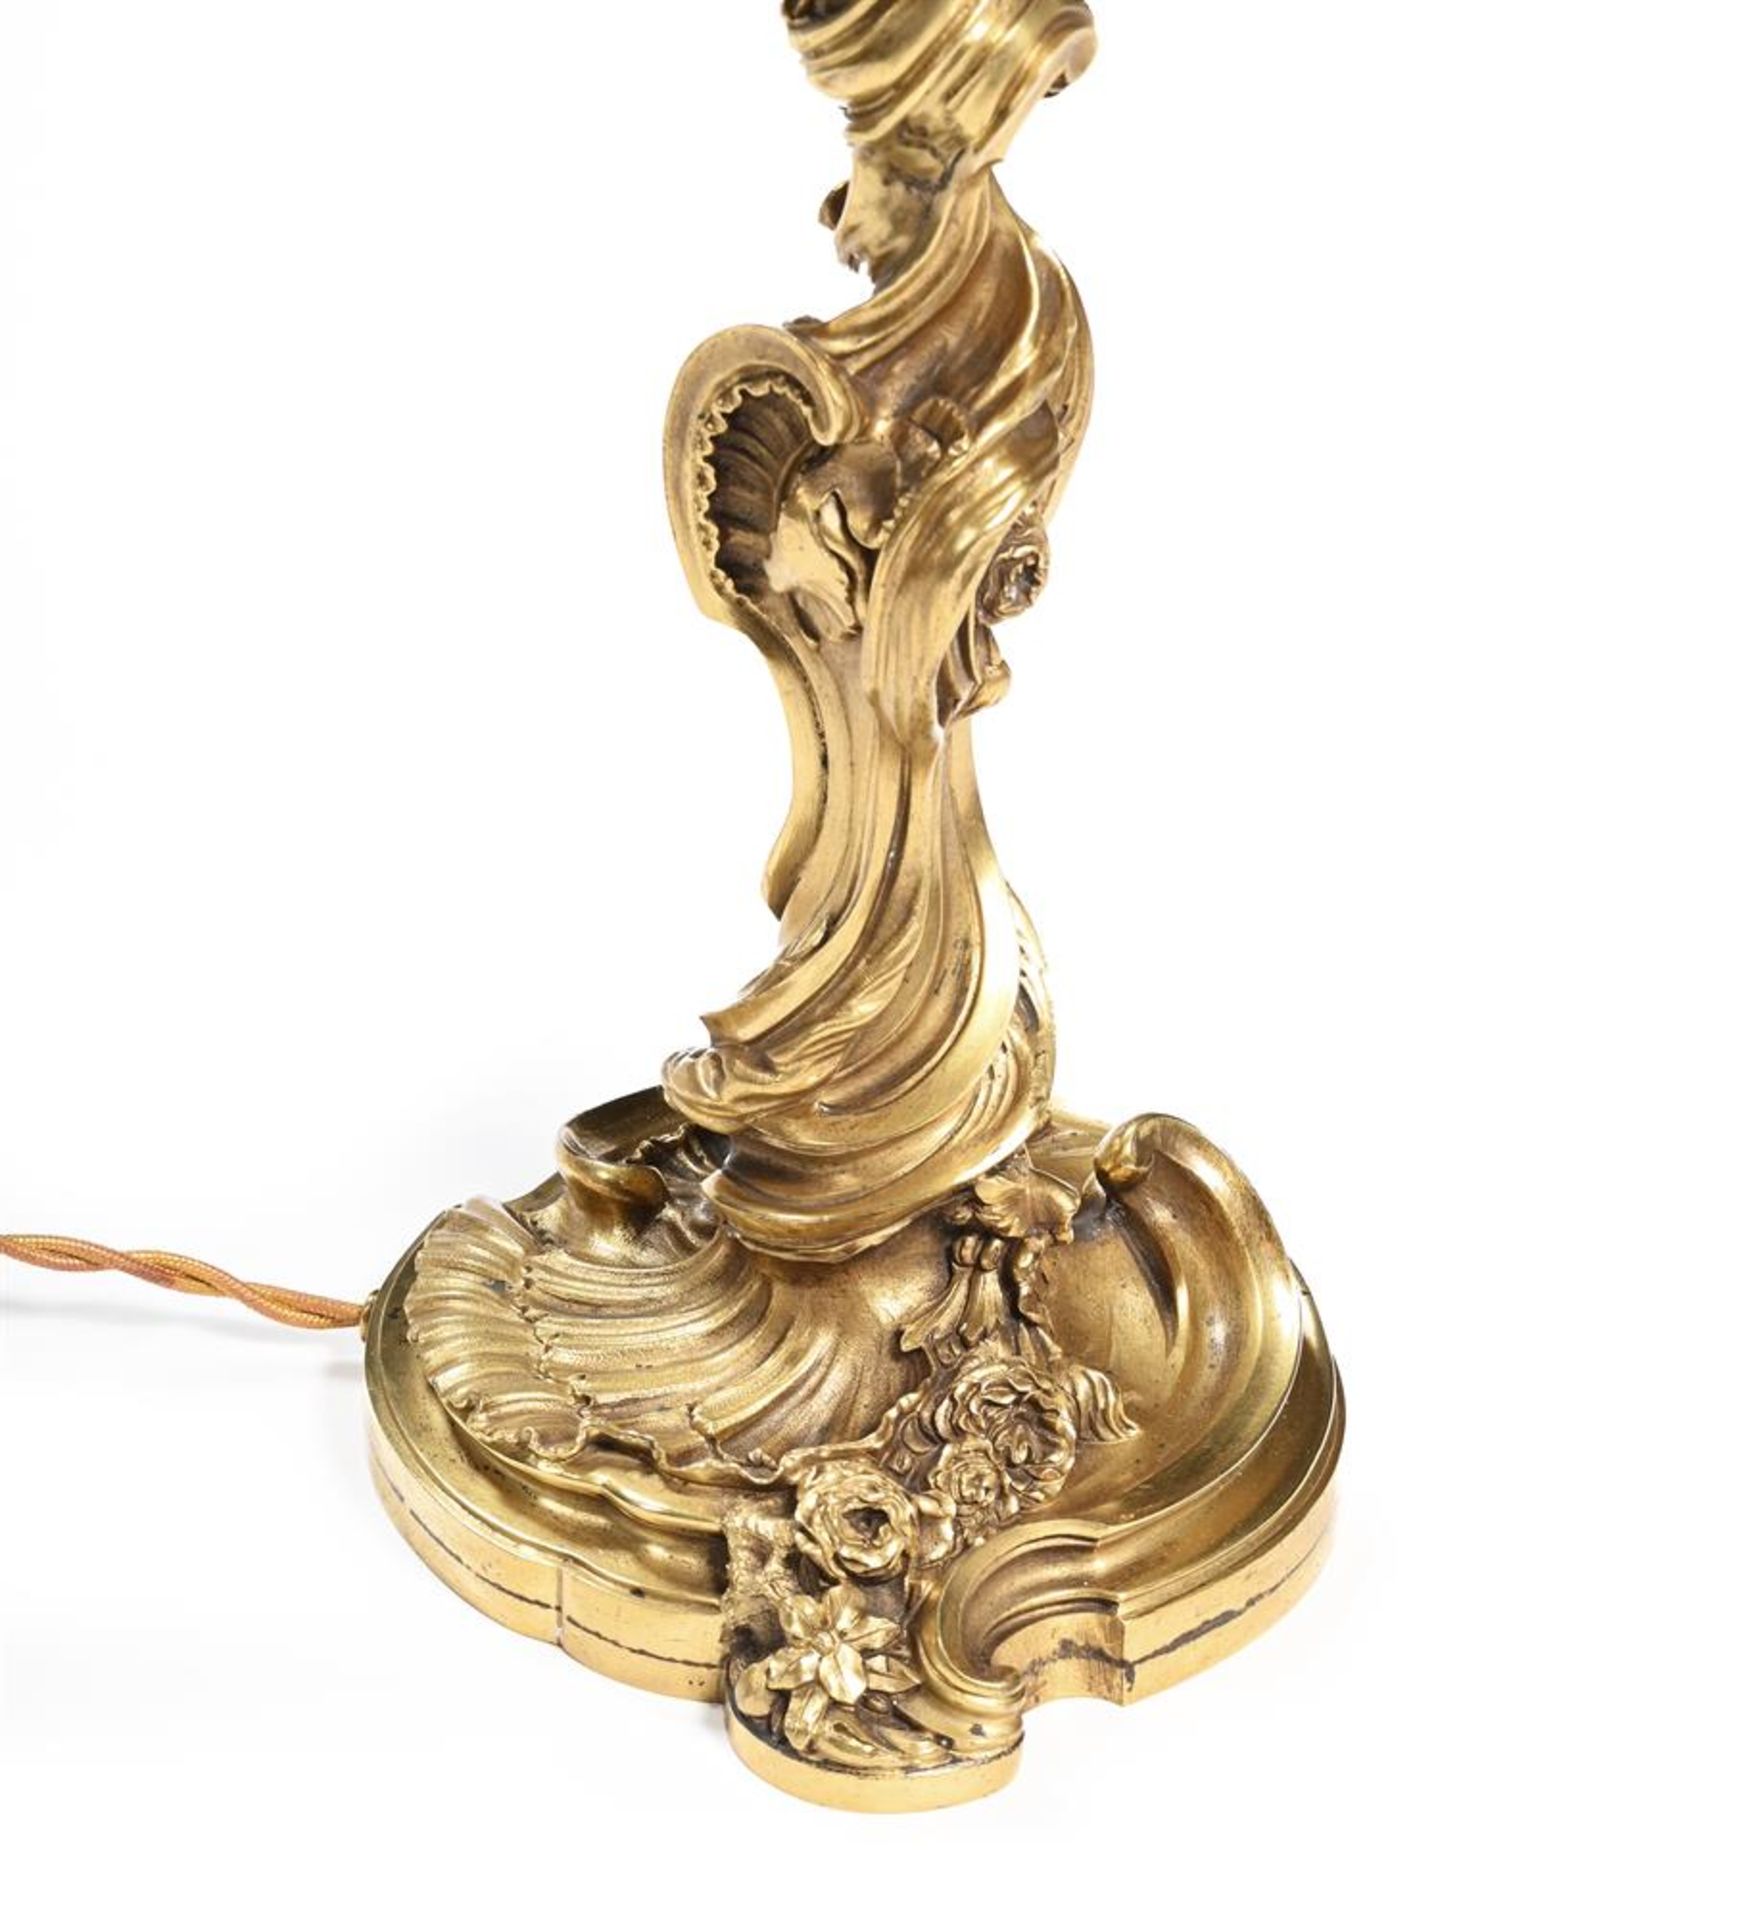 A FRENCH GILT BRONZE CANDLESTICK, AFTER JUSTE-AURÈLE MEISSONNIER, 19TH CENTURY - Image 3 of 3